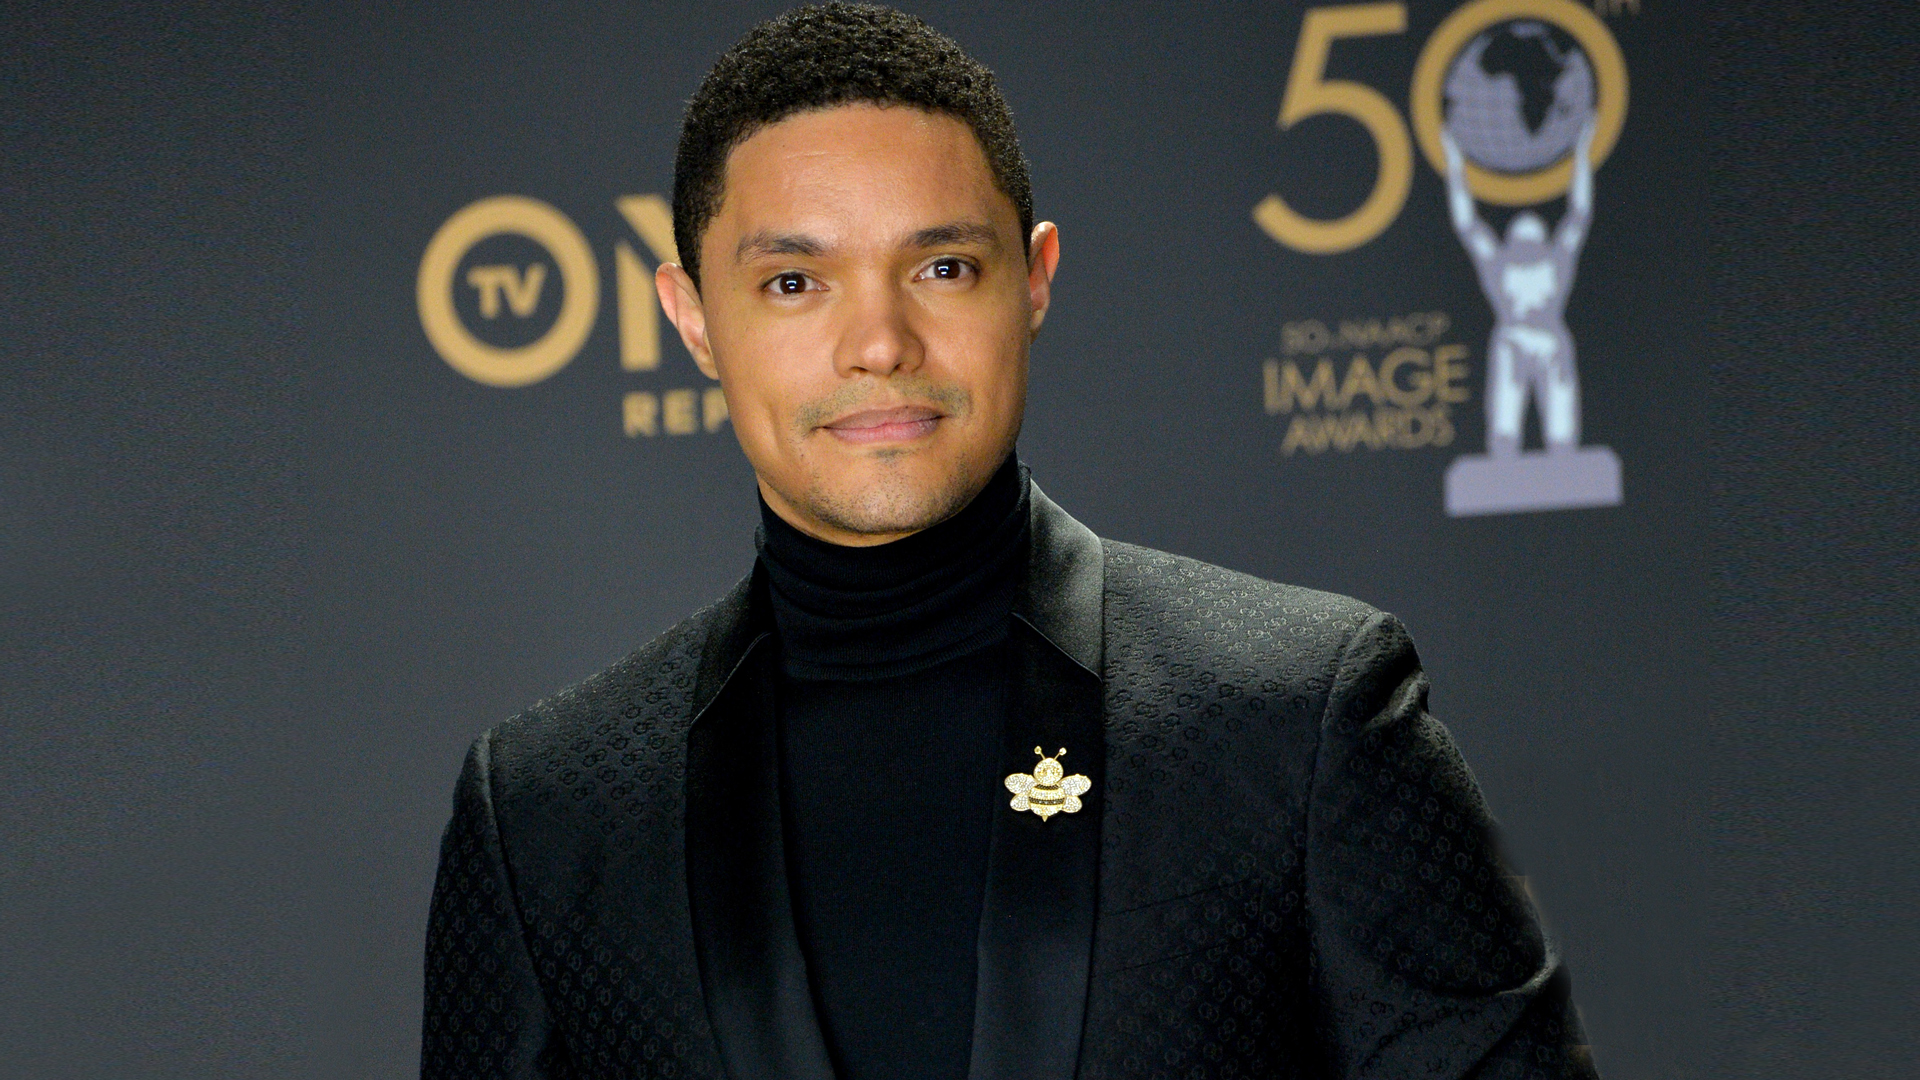 Trevor Noah on what he wants to achieve "My dream is to make people